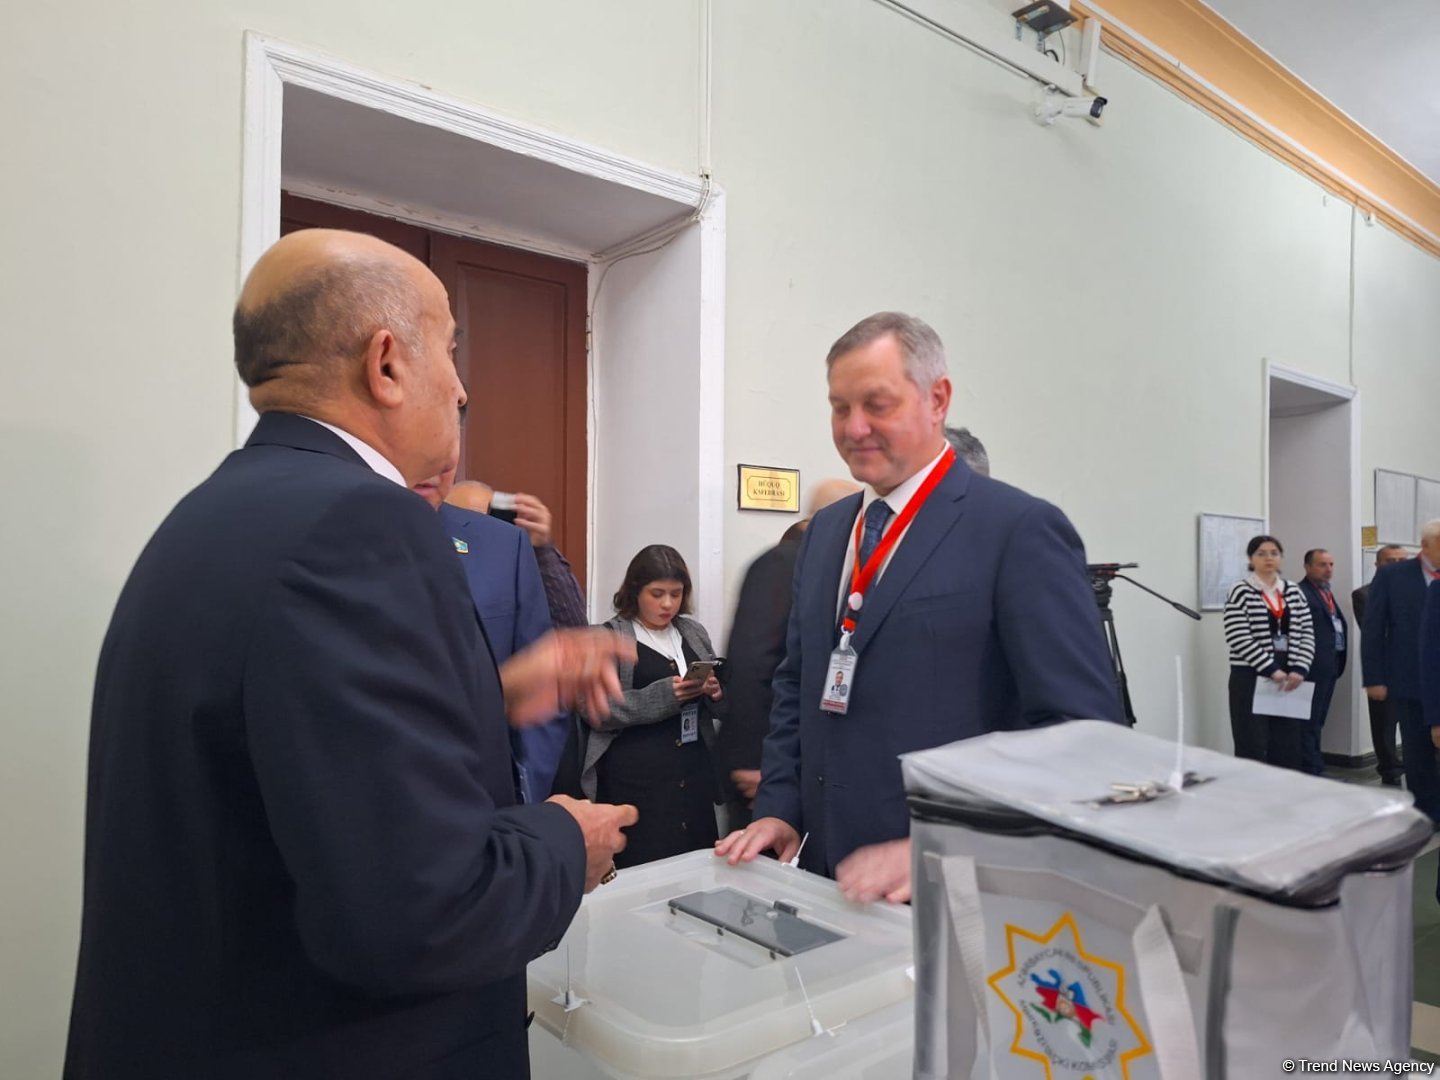 CIS Interparliamentary Assembly mission begins monitoring of presidential election in Azerbaijan (PHOTO)